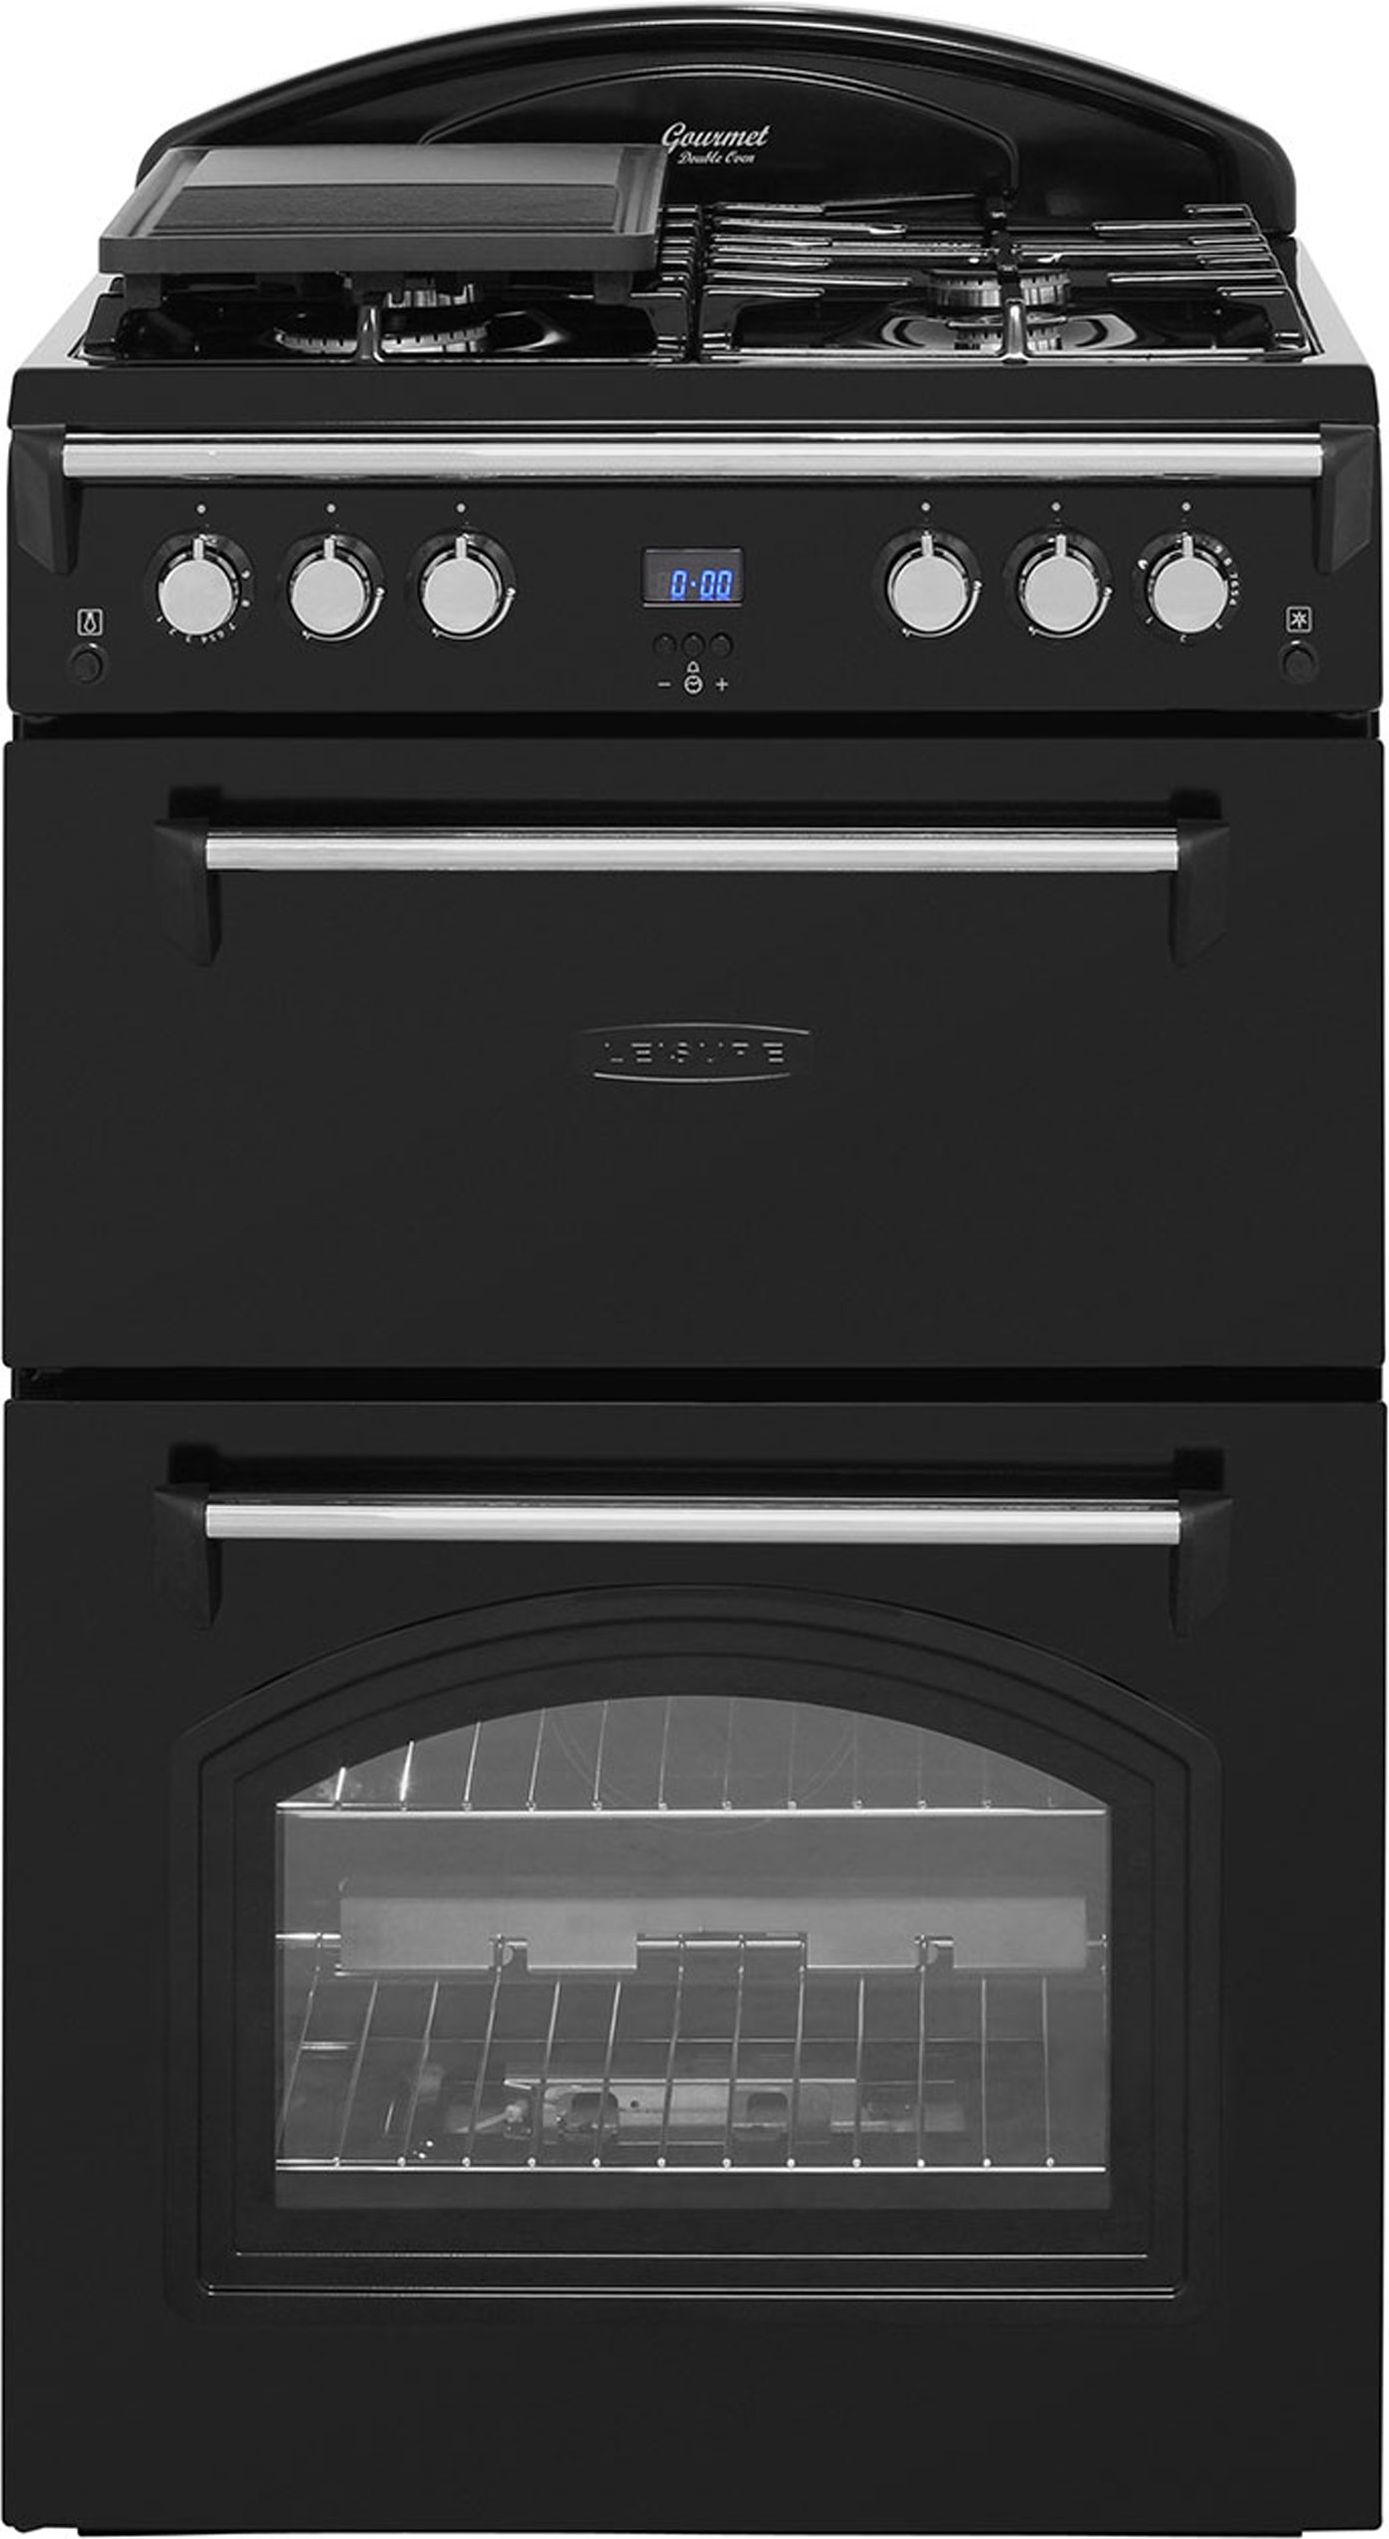 Leisure Gourmet GRB6GVK 60cm Freestanding Gas Cooker with Full Width Gas Grill - Black - A+/A Rated, Black